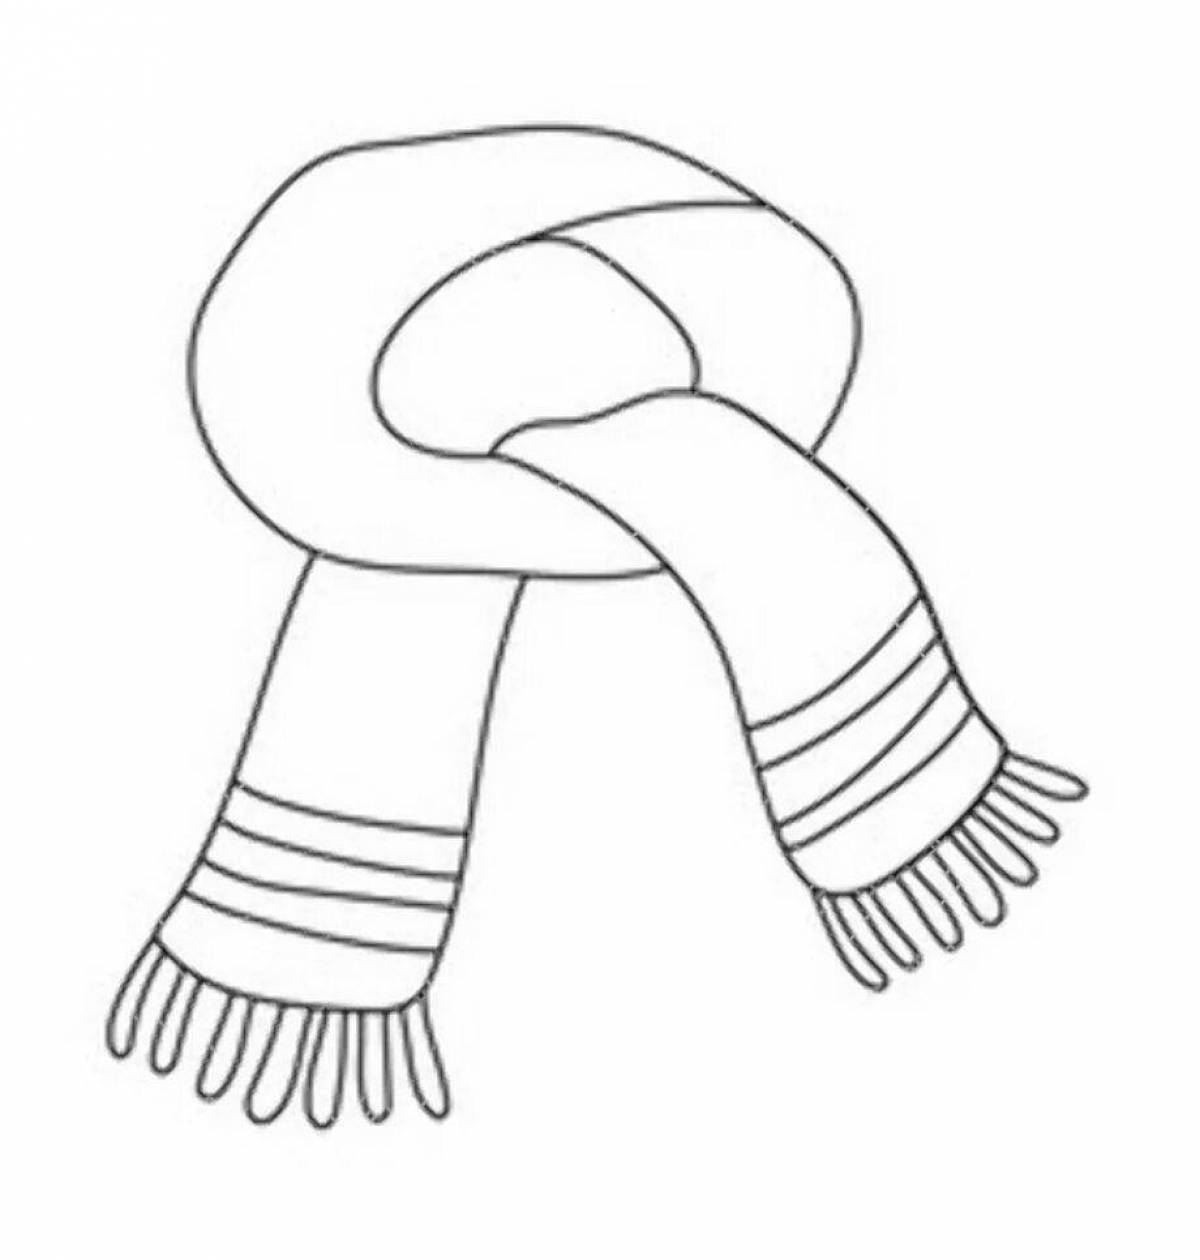 Color-frenzy scarf coloring page для детей